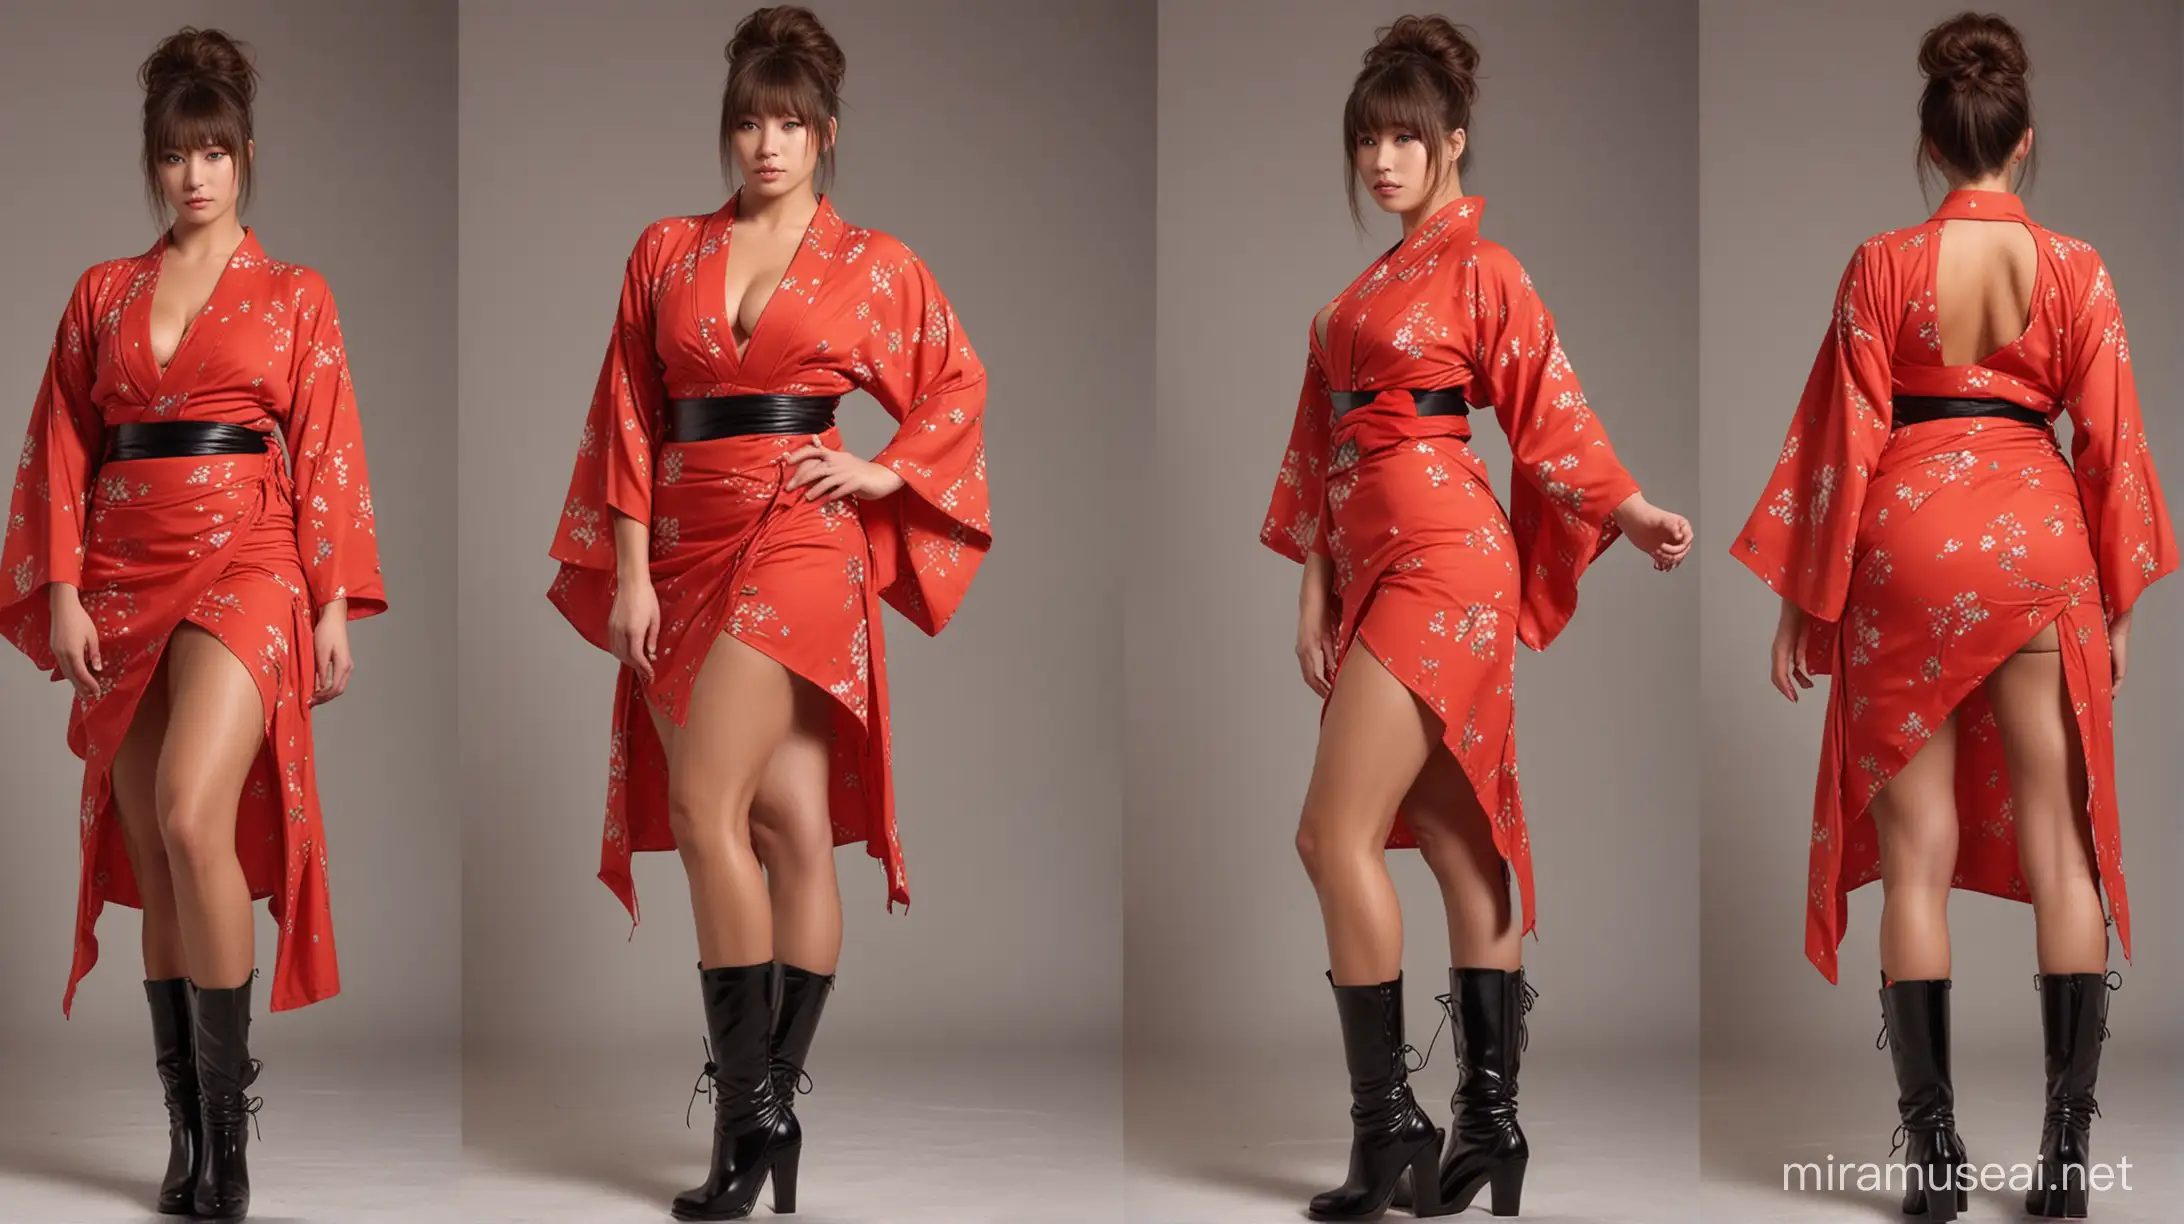 extremely cute girl; Extremely gigantic; extremely muscular; extremely muscular arms; sexy; very beautiful; seductive; has bangs; two-slit red dress; wrap-up sleeves; long platform boots with thick soles; extremely massive thighs; extremely muscular thighs; kimono sleeves; messy hairstyle; tanned; extremely large and massive legs; very big breasts; cleavage;                                                               